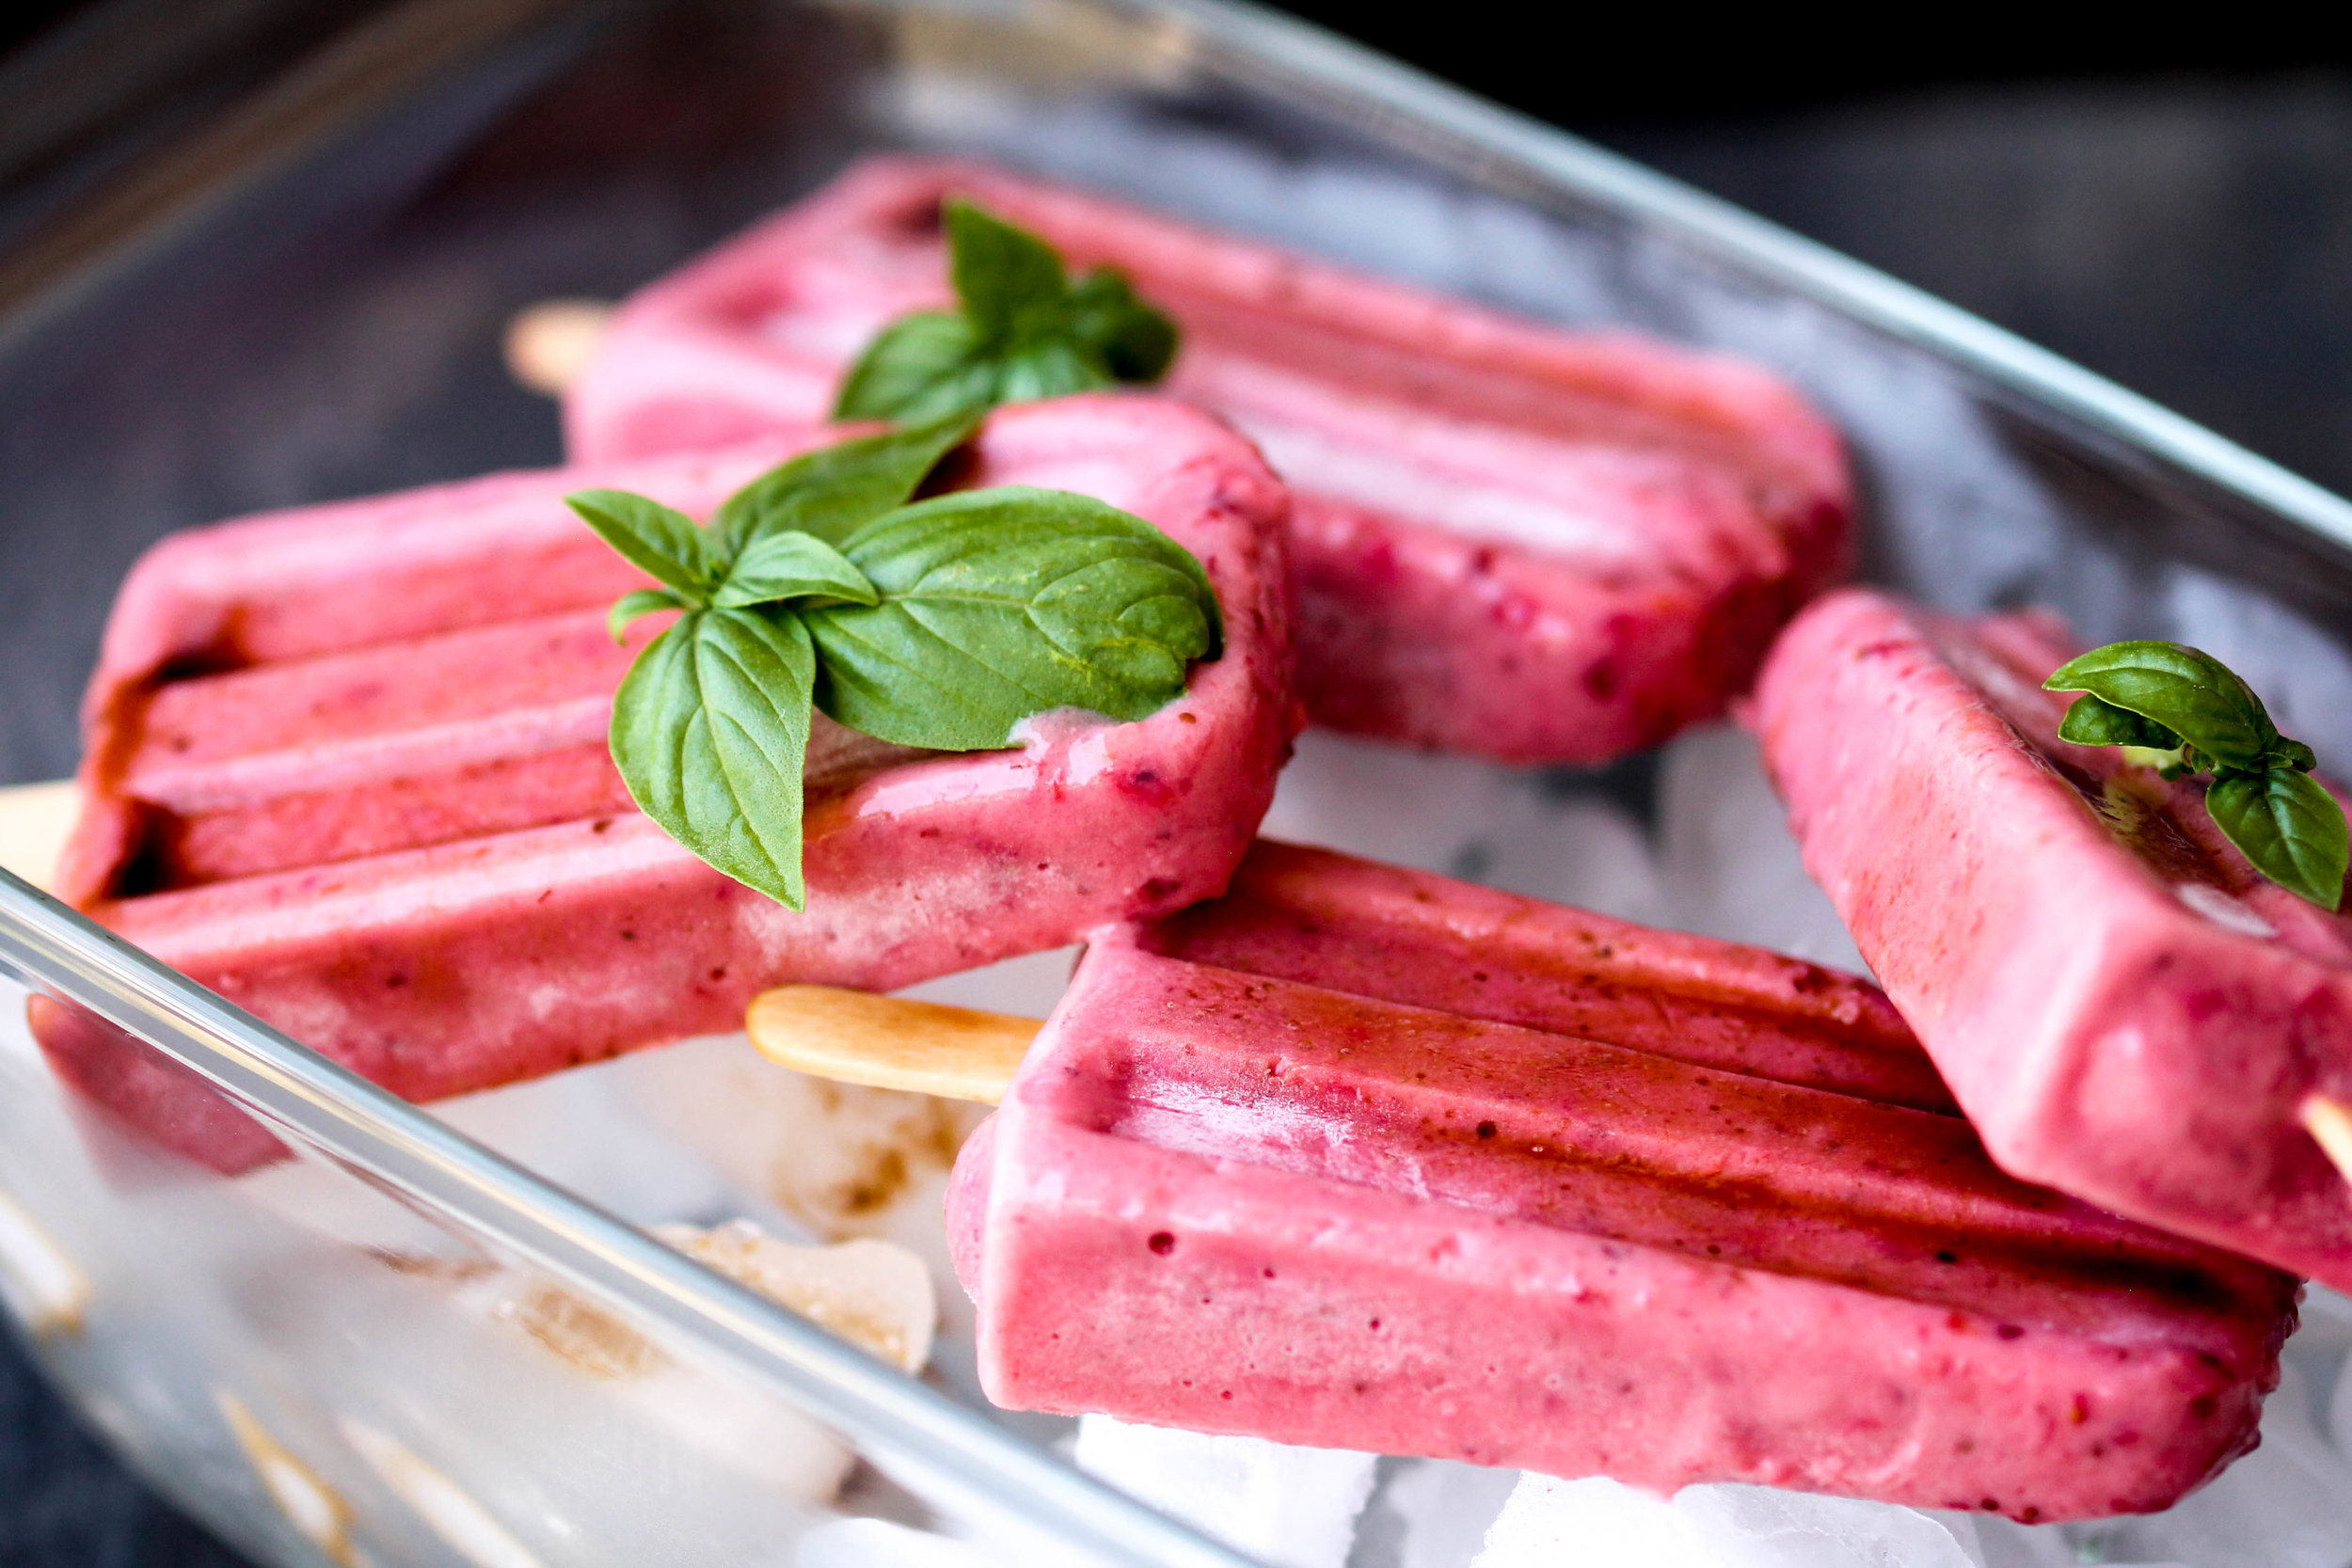 Balsamic Roasted Strawberry Popsicles - 4 Ingredients, Easy Vegan Popsicles for everyone to enjoy this Summer!